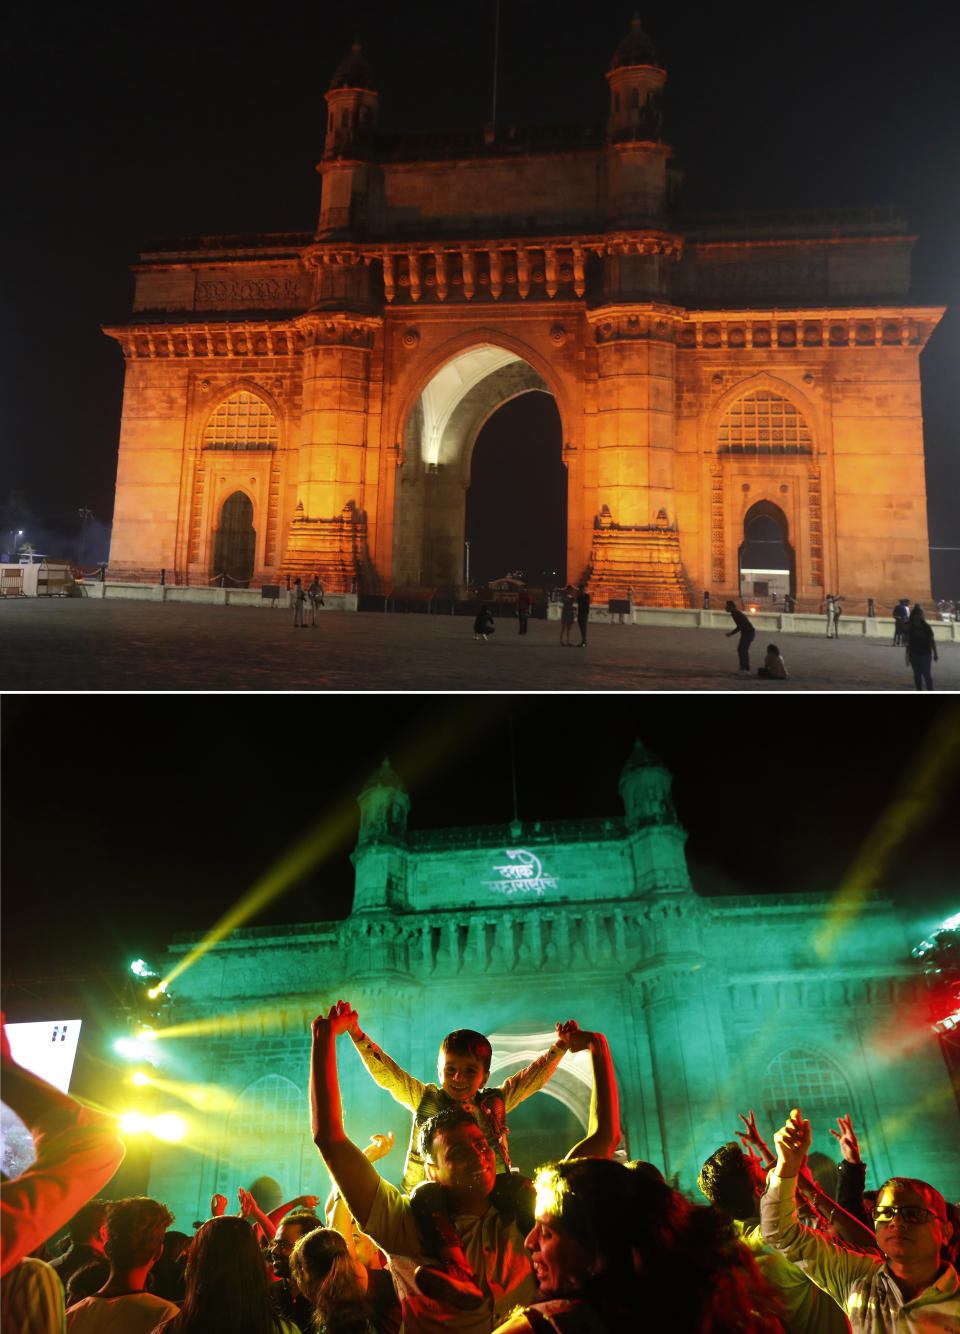 This combination photograph shows a handful of people in front of the iconic Gateway of India, top, a popular place to celebrate New Year's Eve in Mumbai, India, Thursday, Dec. 31, 2020, as compared to a file photograph of a crowd celebrating on Dec. 31, 2019. As the world says goodbye to 2020, there will be countdowns and live performances, but no massed jubilant crowds in traditional gathering spots like the Champs Elysees in Paris and New York City's Times Square this New Year's Eve. The virus that ruined 2020 has led to cancelations of most fireworks displays and public events in favor of made-for-TV-only moments in party spots like London and Rio de Janeiro. (AP Photo/Rafiq Maqbool, Rajanish Kakade)